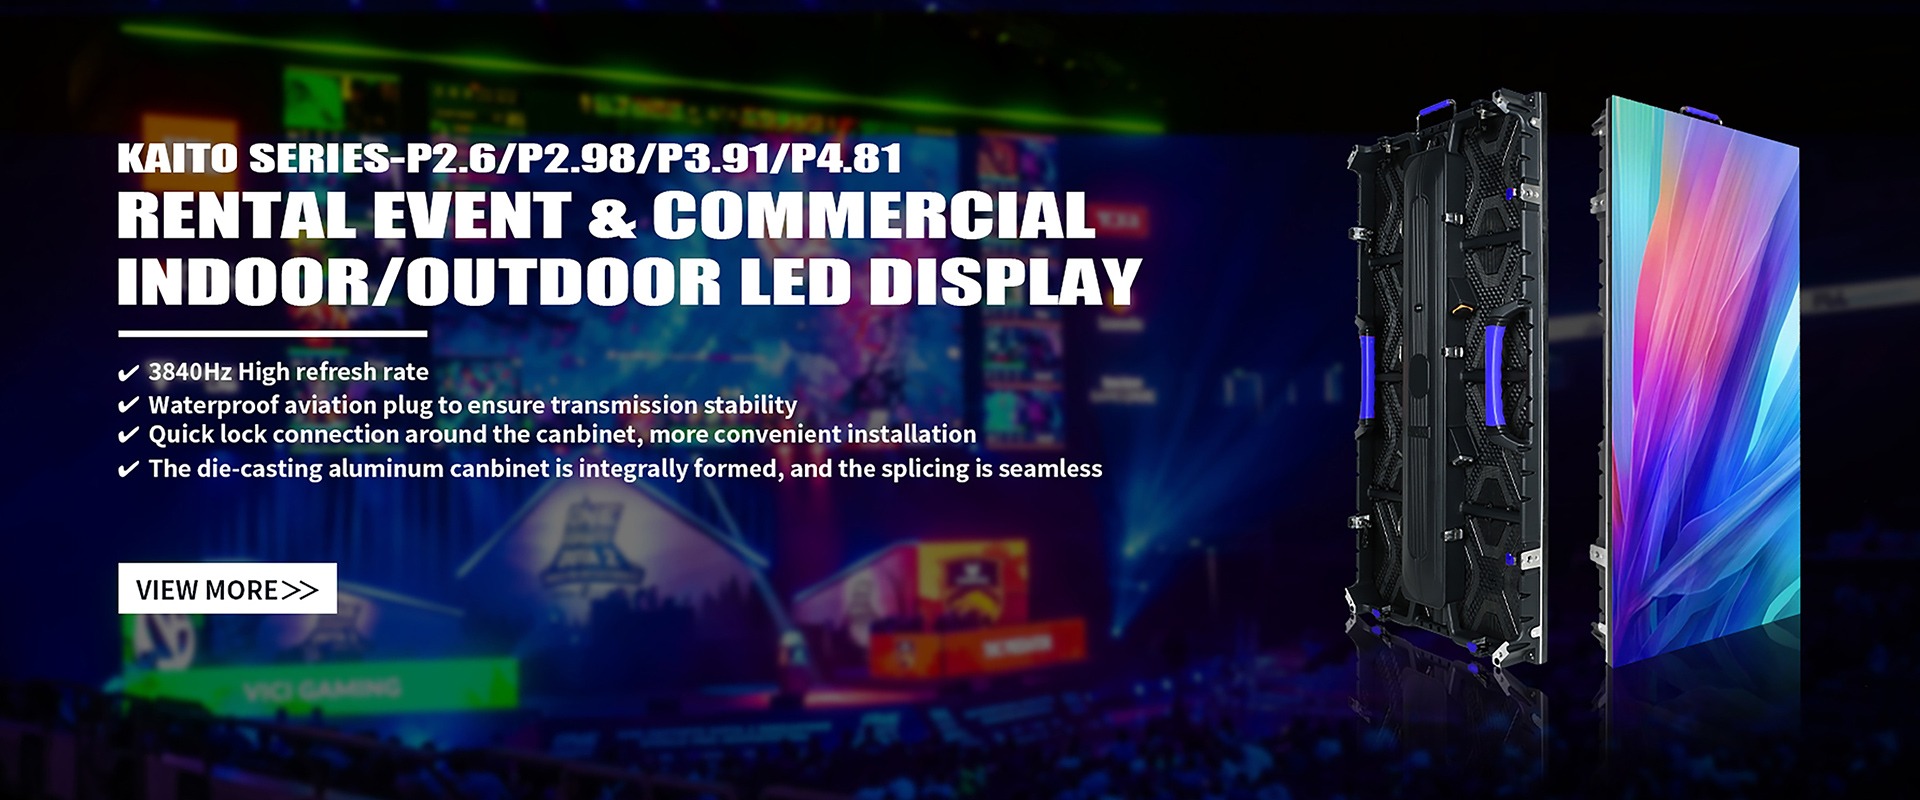 RENTAL EVENT COMMERCIAL LED DISPLAY